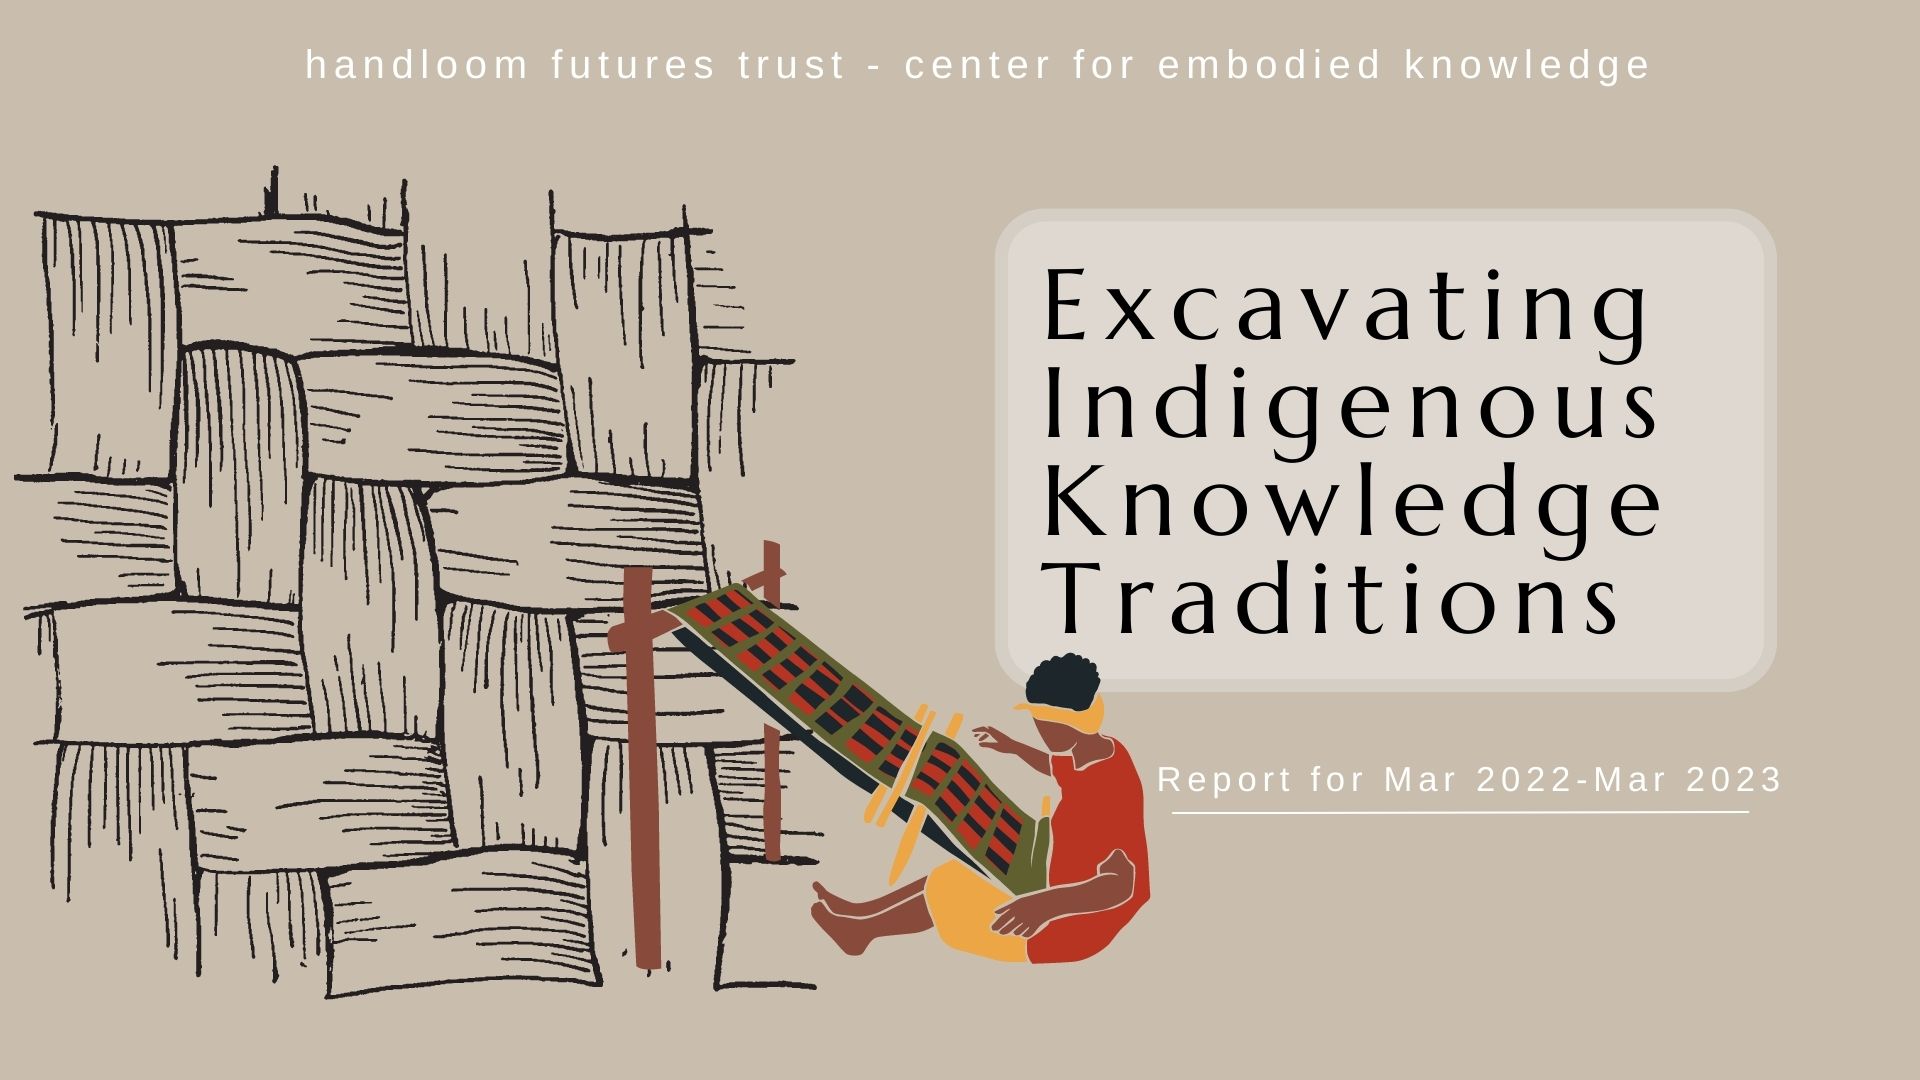 Excavating Indigenous Knowledge Traditions